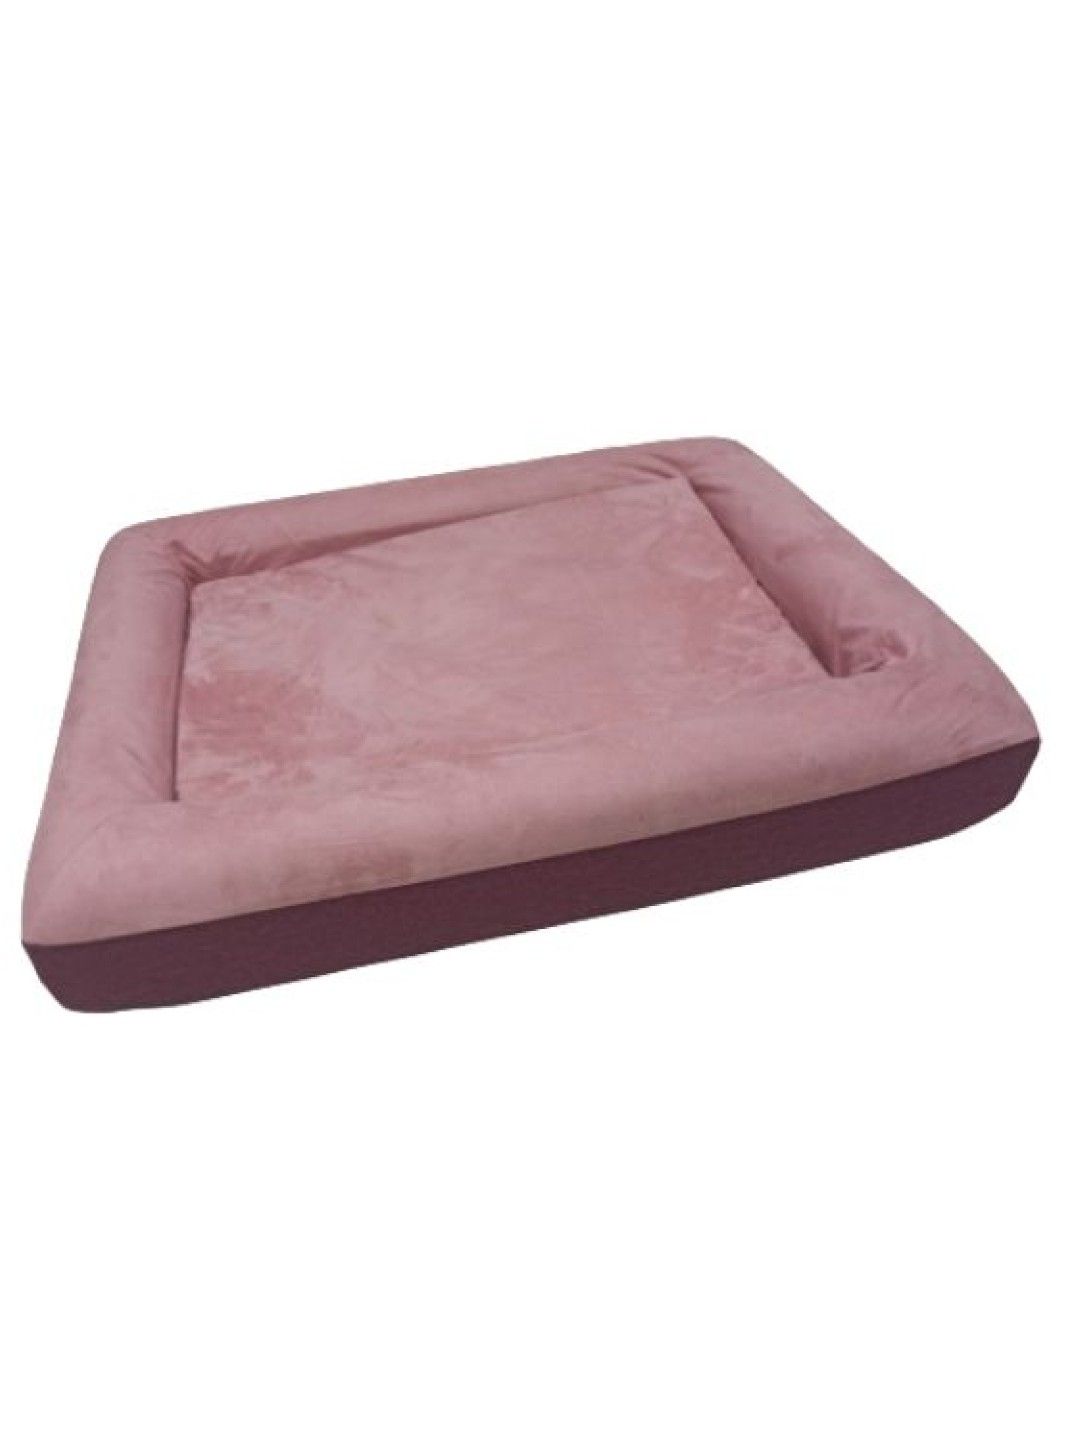 Petto Beddo Pet Bed (Pink- Image 3)